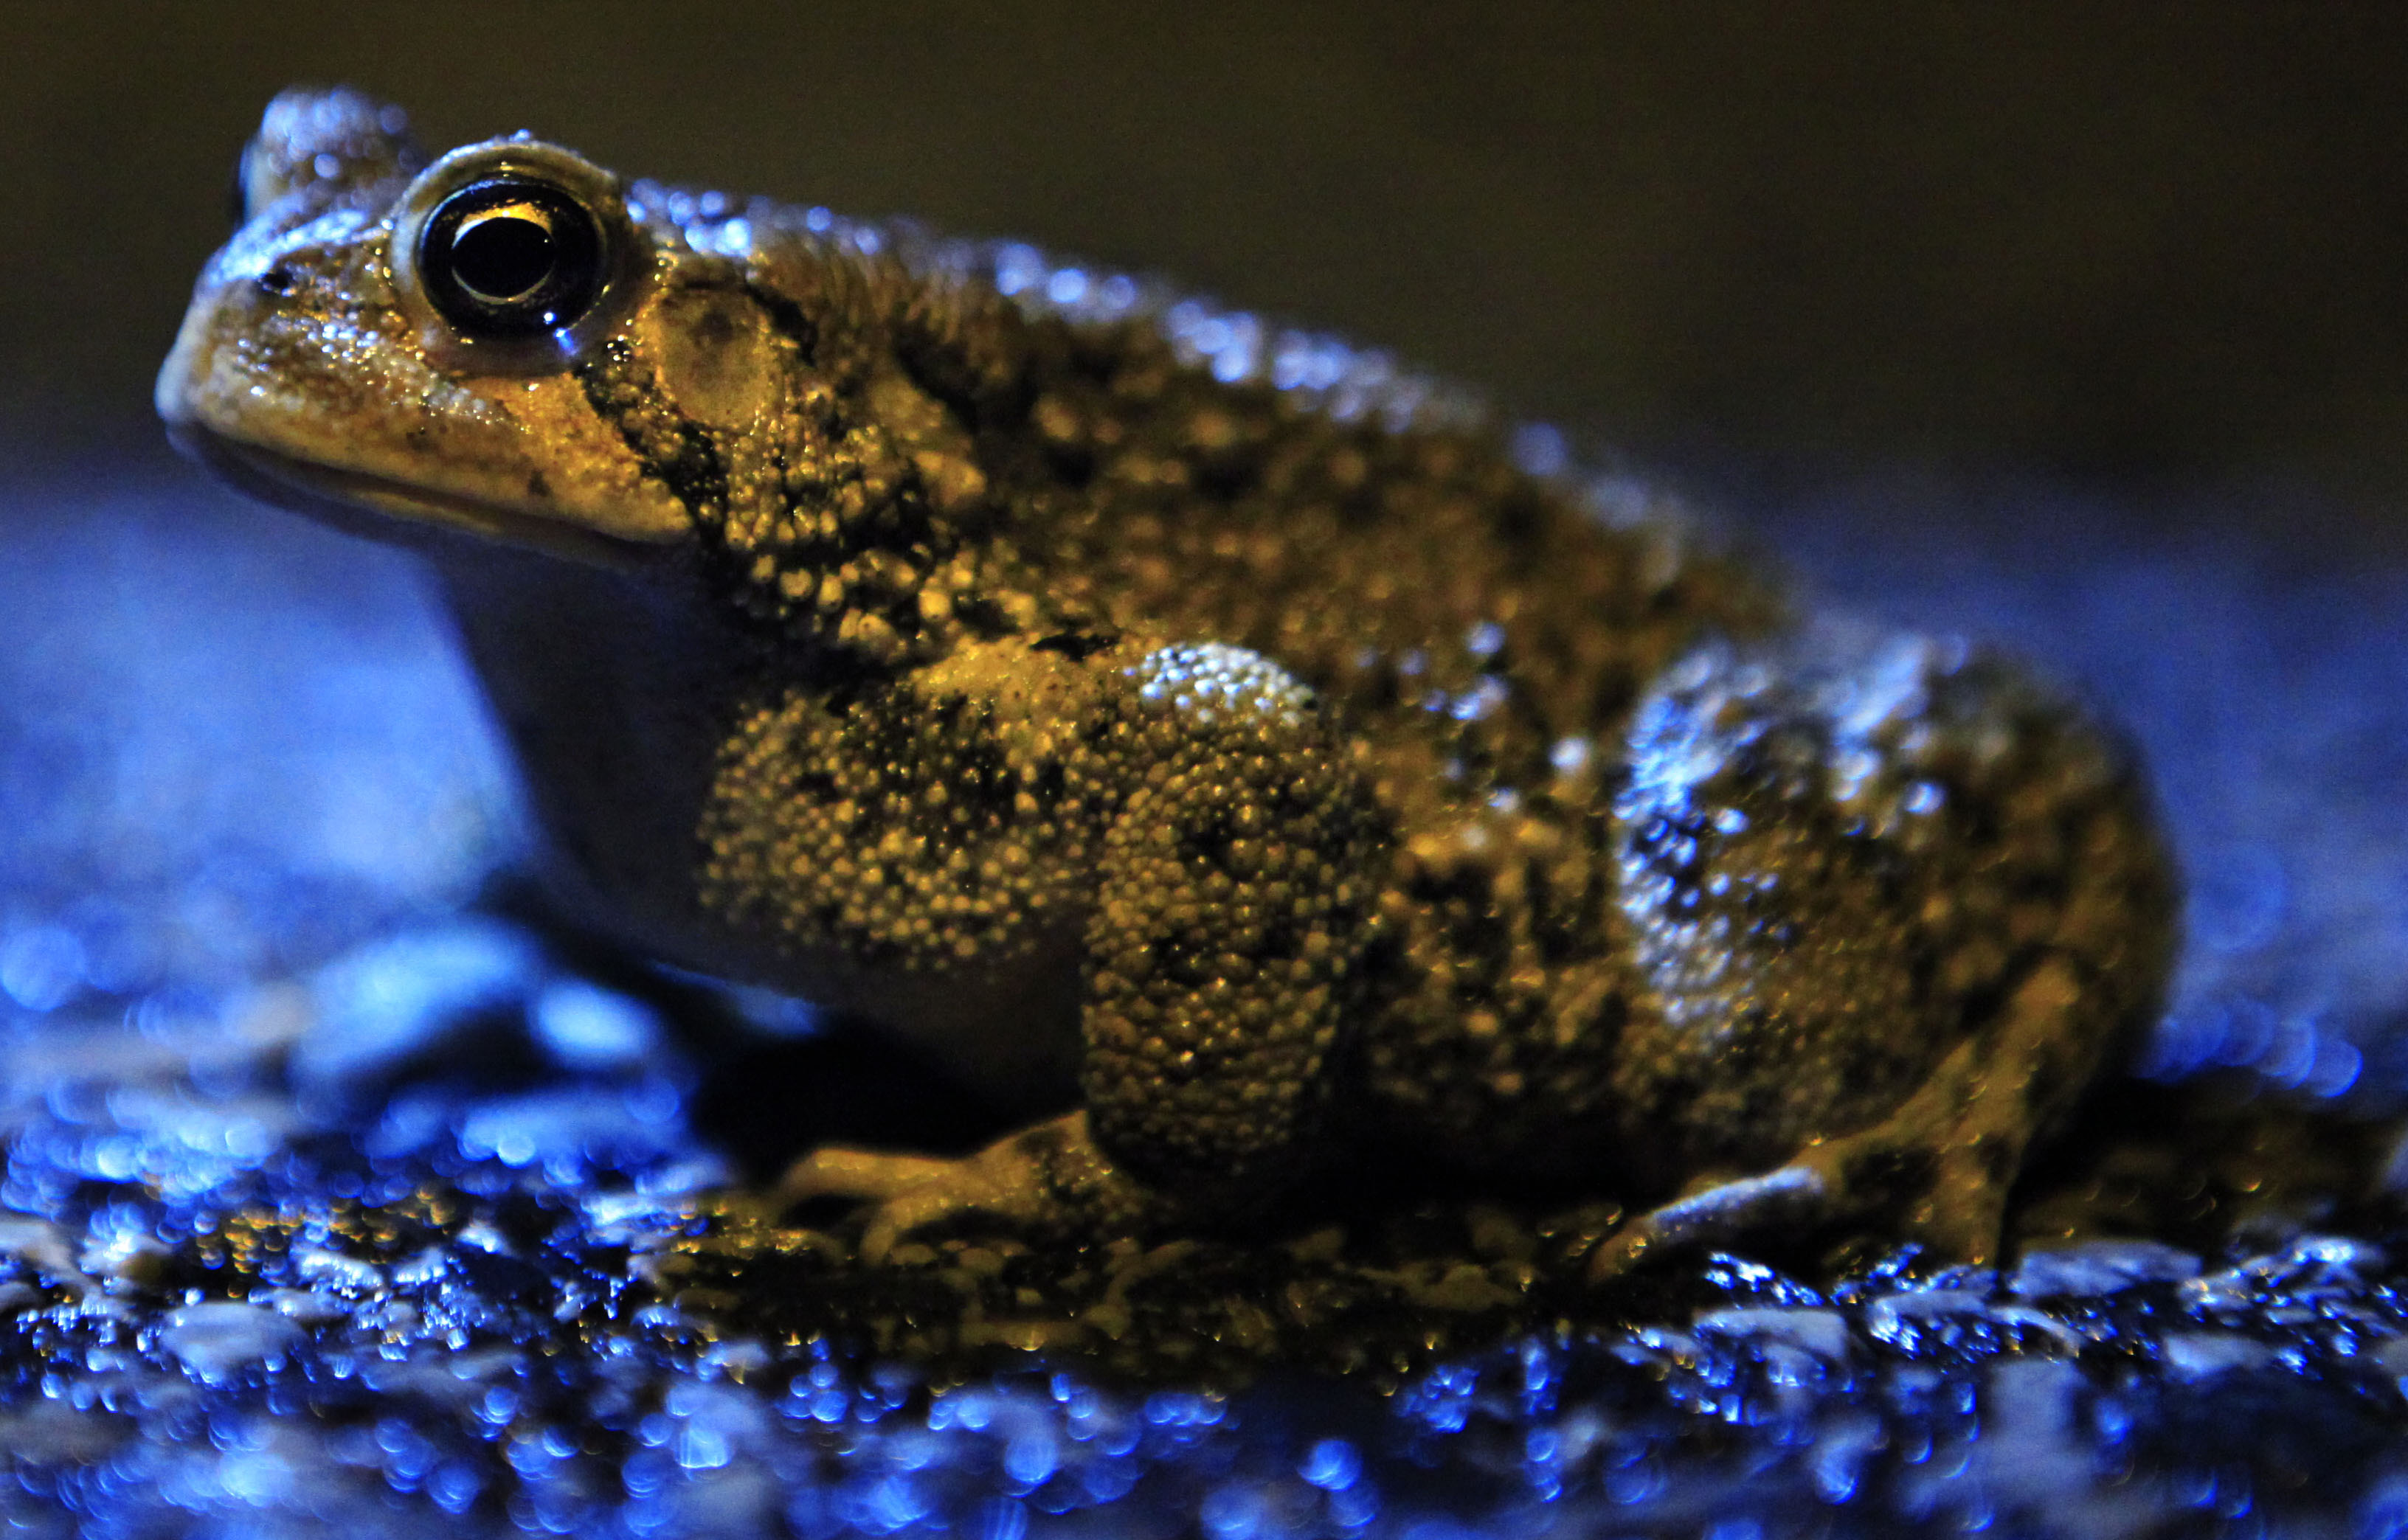 The National Park service asks visitors not to lick toads